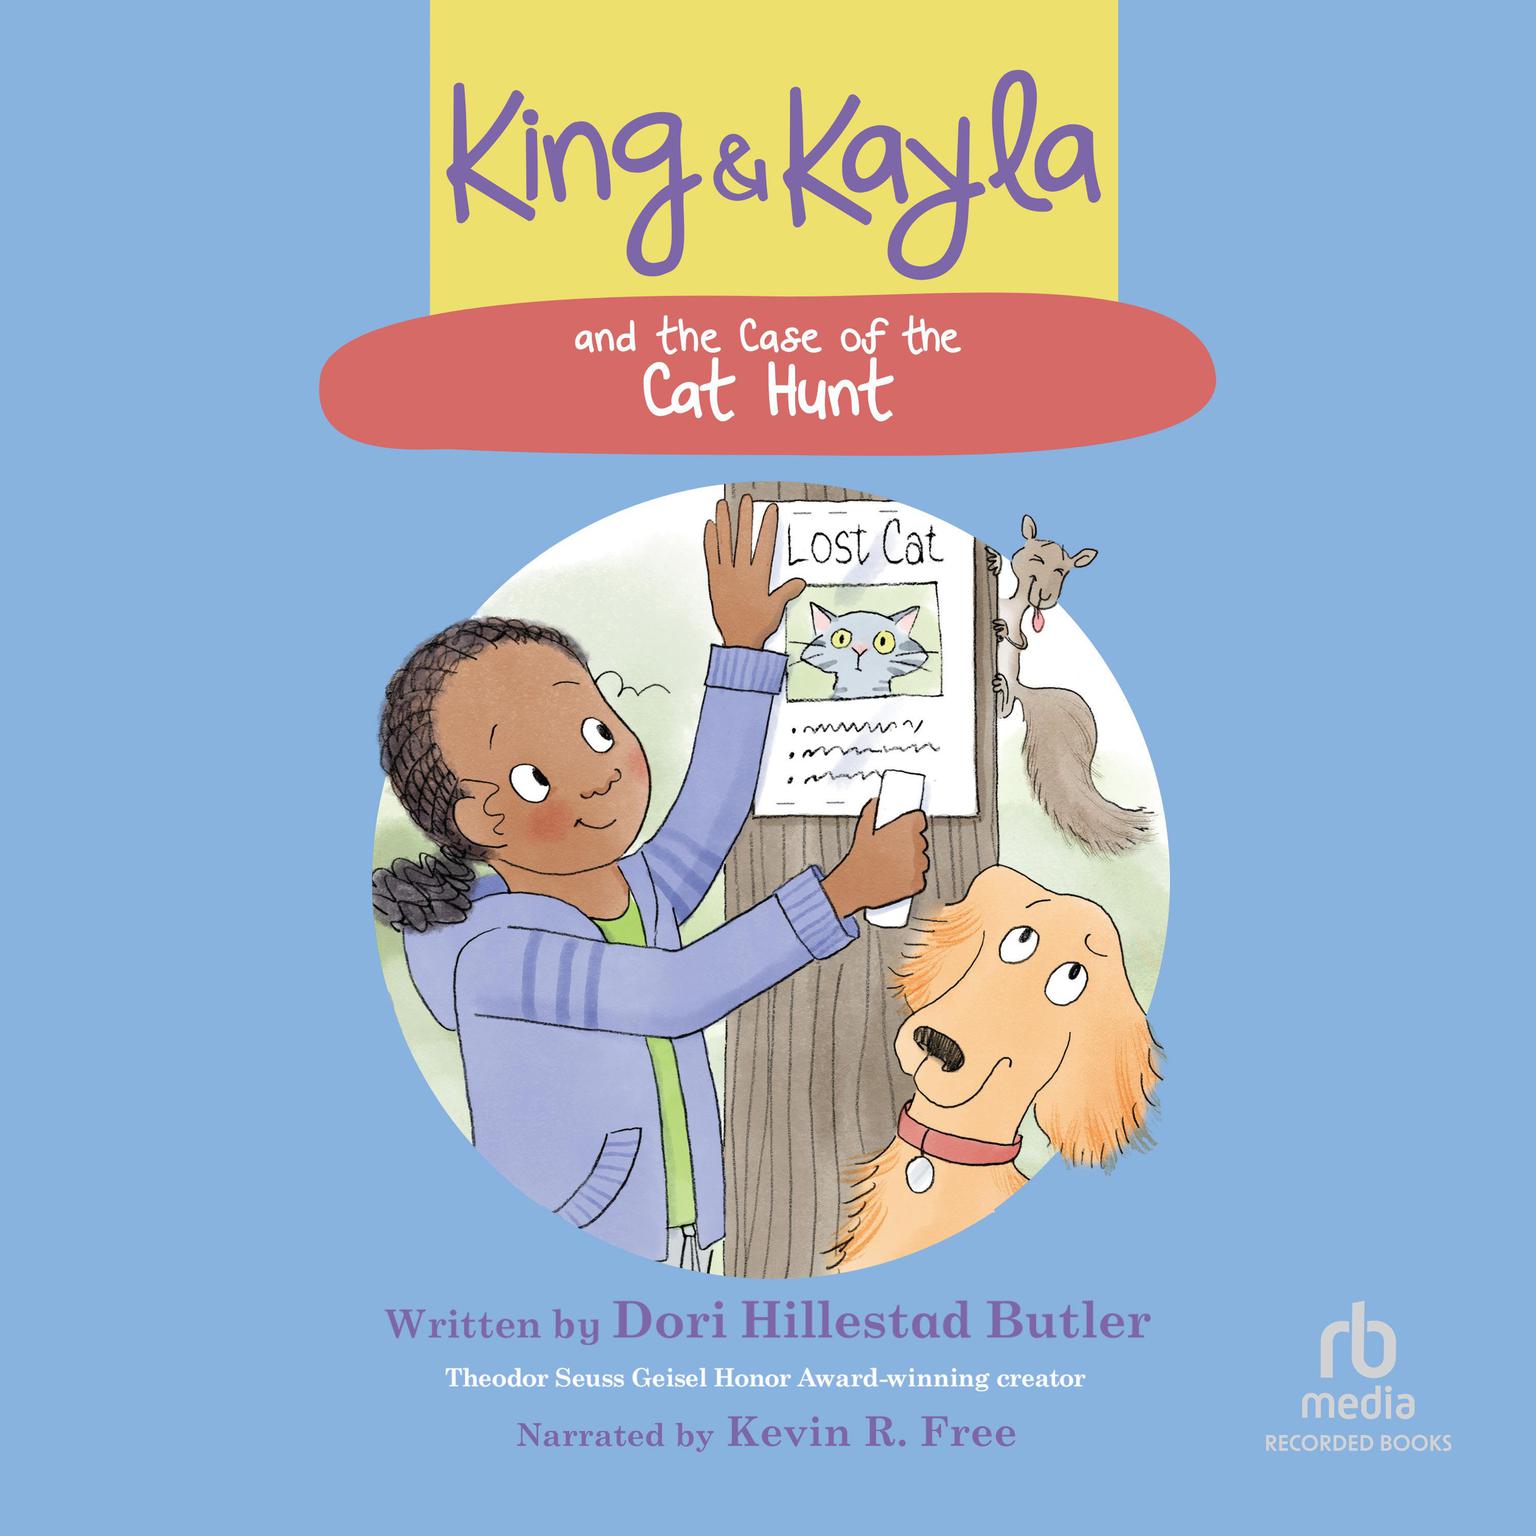 King and Kayla and the Case of the Cat Hunt Audiobook, by Dori Hillestad Butler  